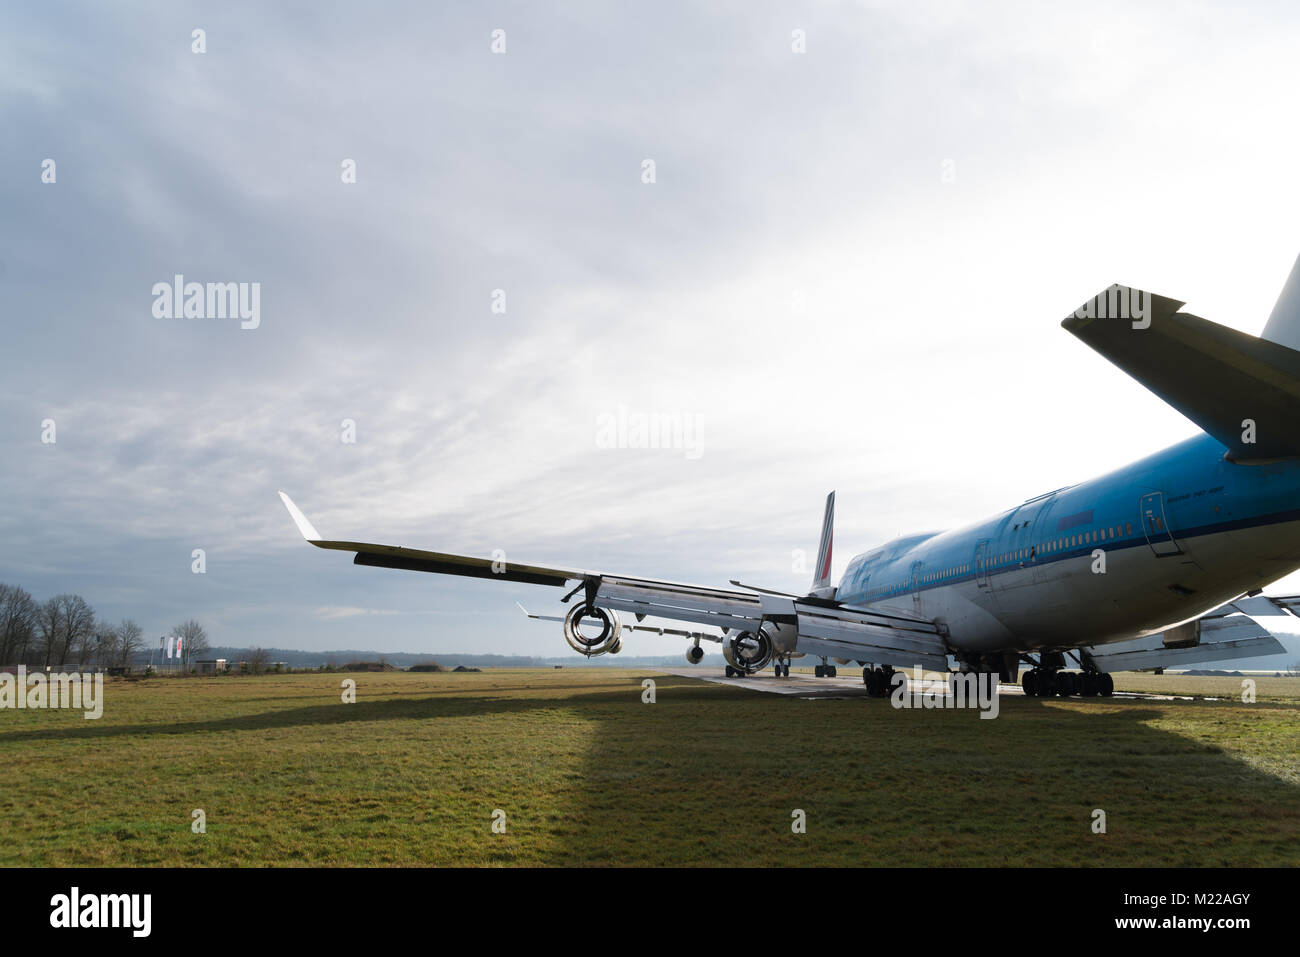 ENSCHEDE, NETHERLANDS - FEBRUARY 3, 2018: Two commercial passenger airplanes to be dismantled on a former military airfield Stock Photo